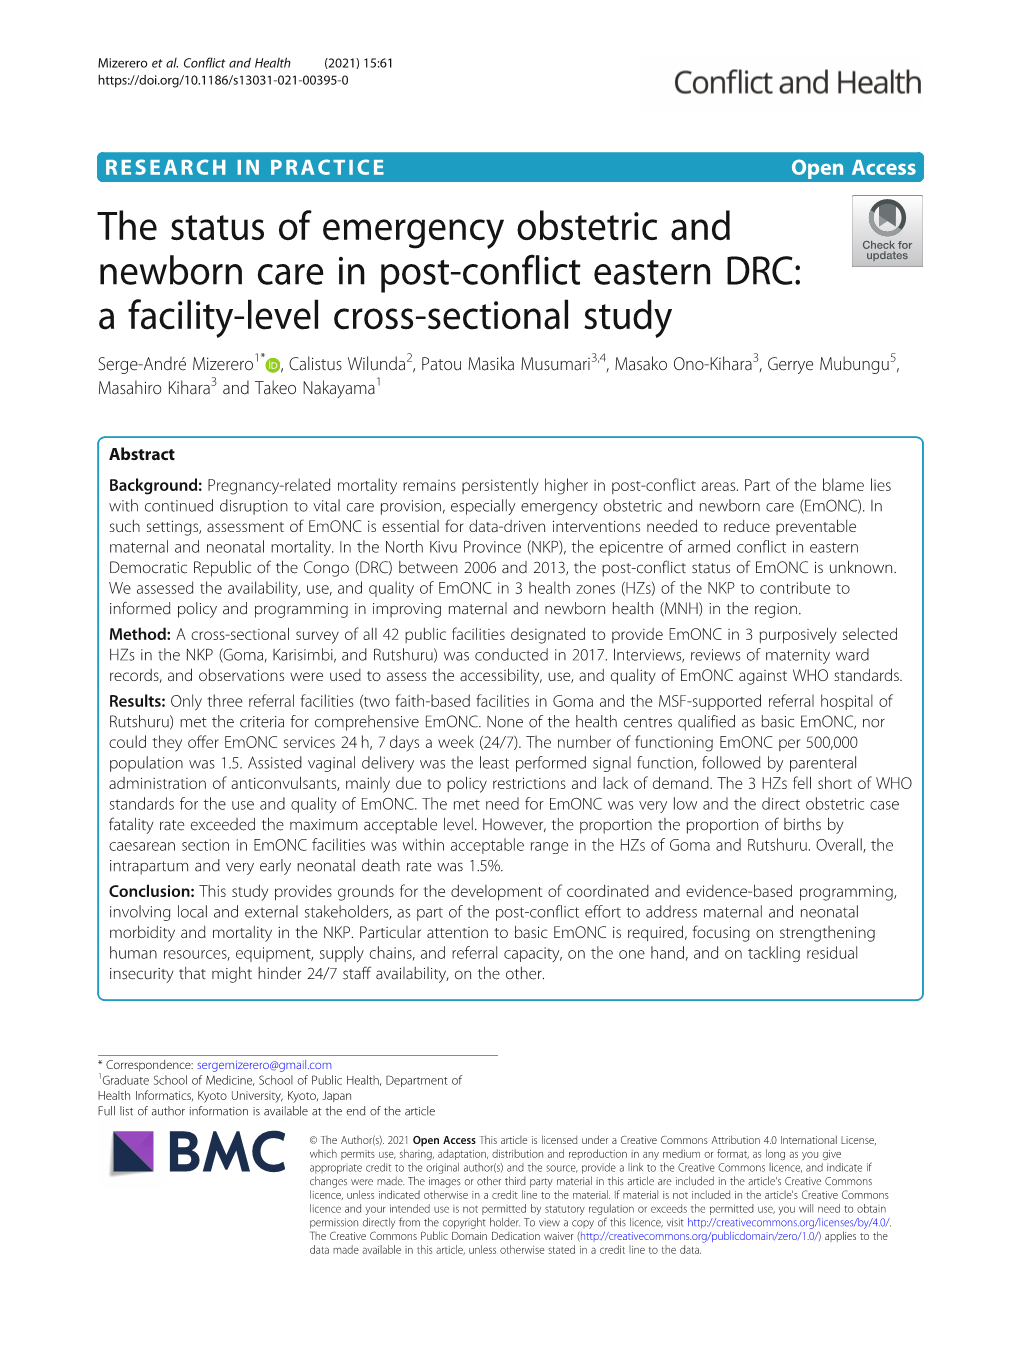 The Status of Emergency Obstetric and Newborn Care in Post